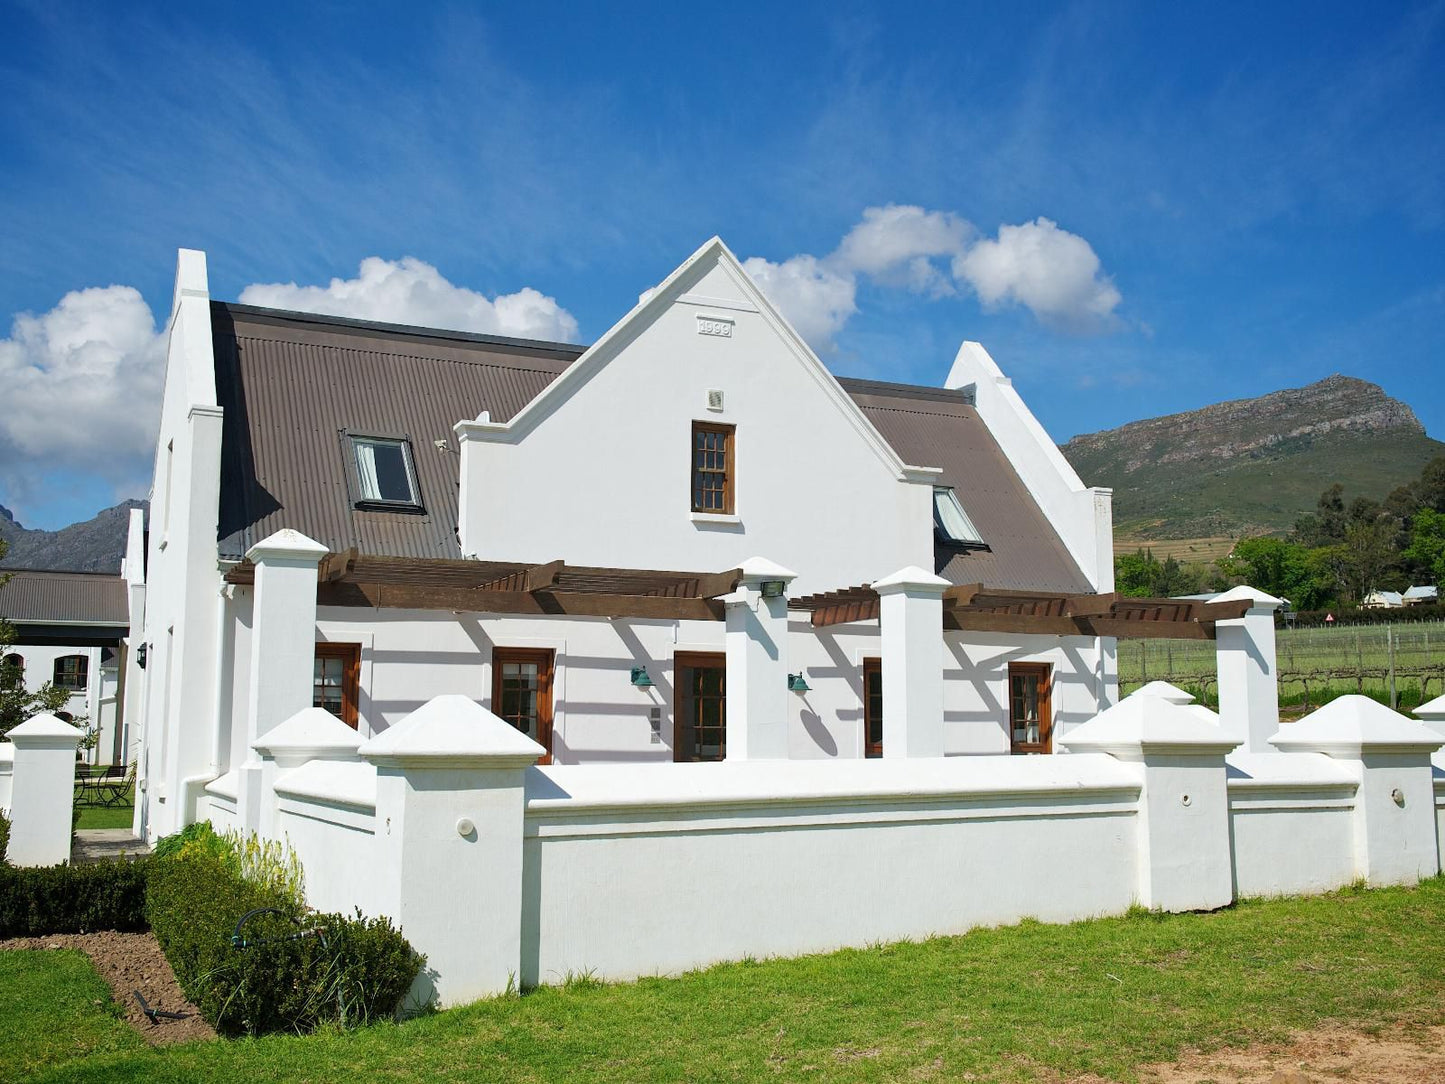 Zorgvliet Wines Country Lodge Kylemore Stellenbosch Western Cape South Africa House, Building, Architecture, Mountain, Nature, Highland